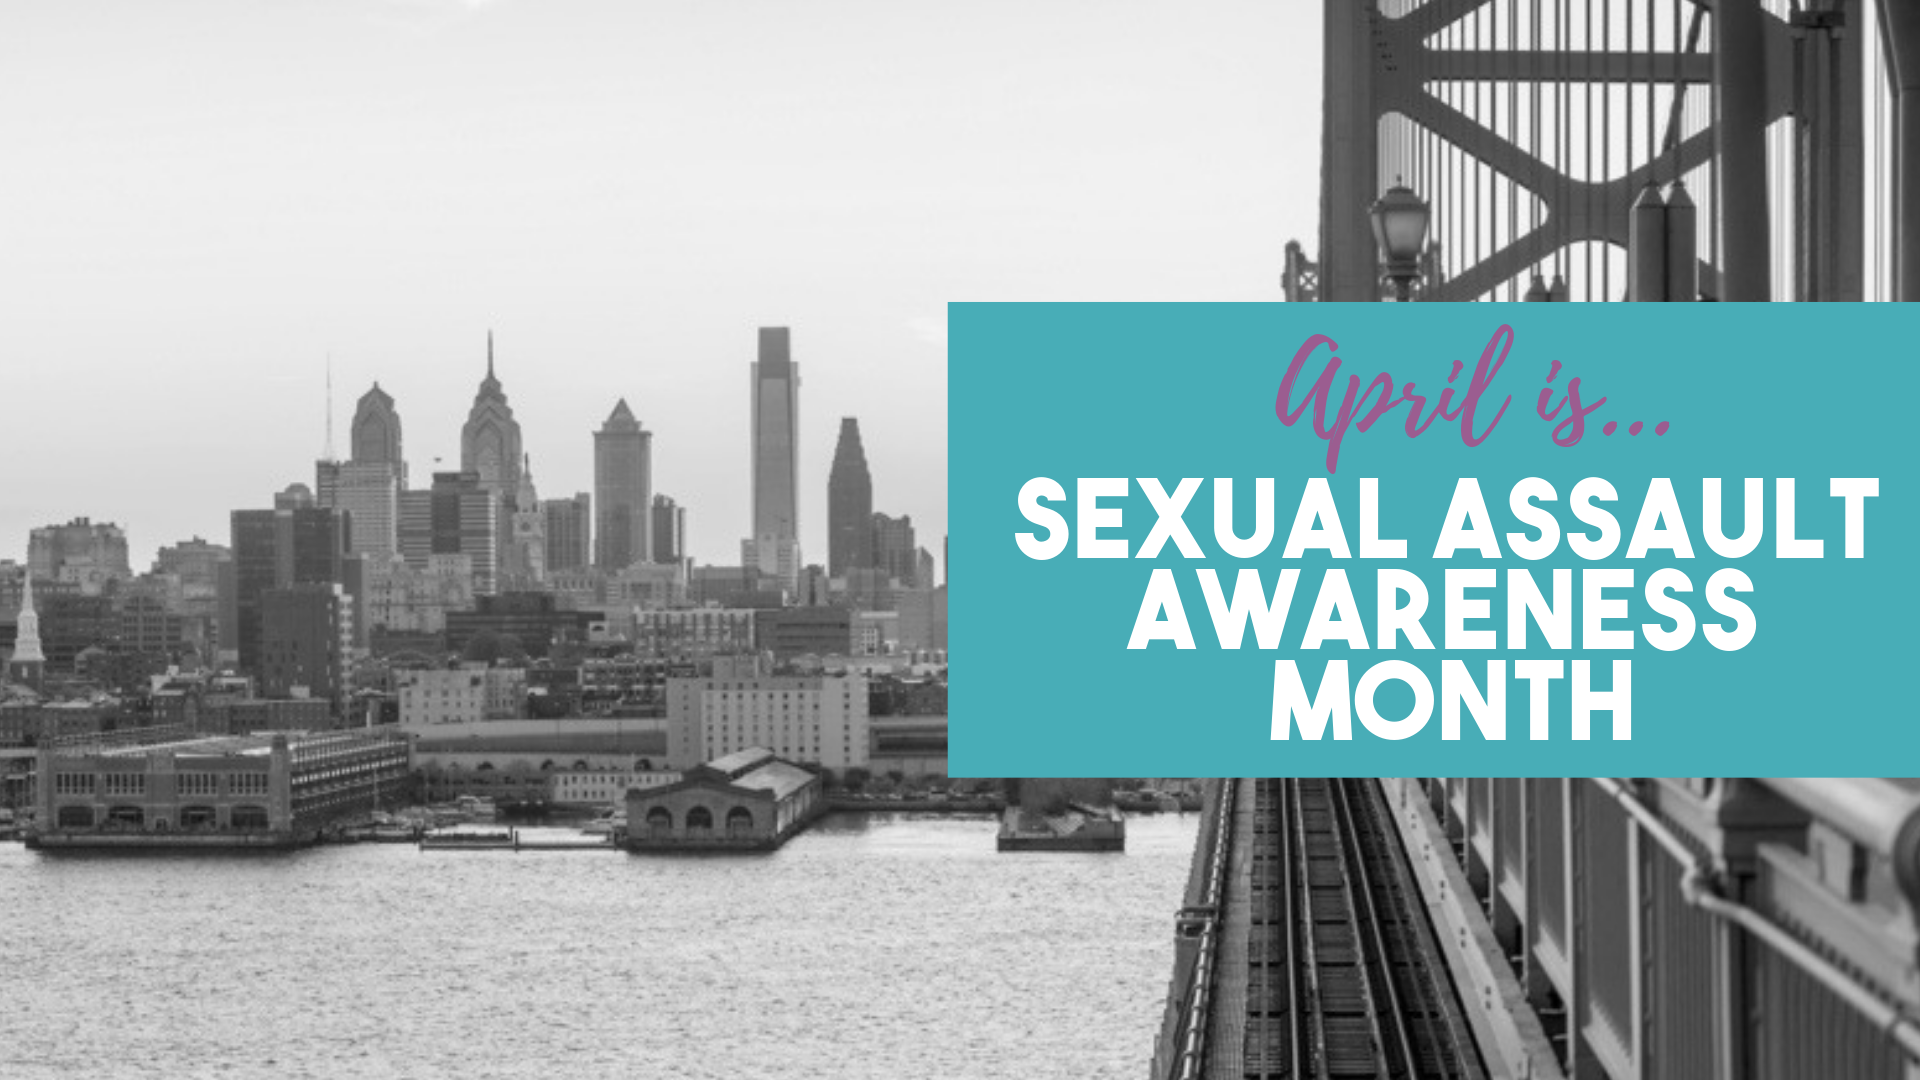 April 1st marks the start of National Sexual Assault Awareness Month!